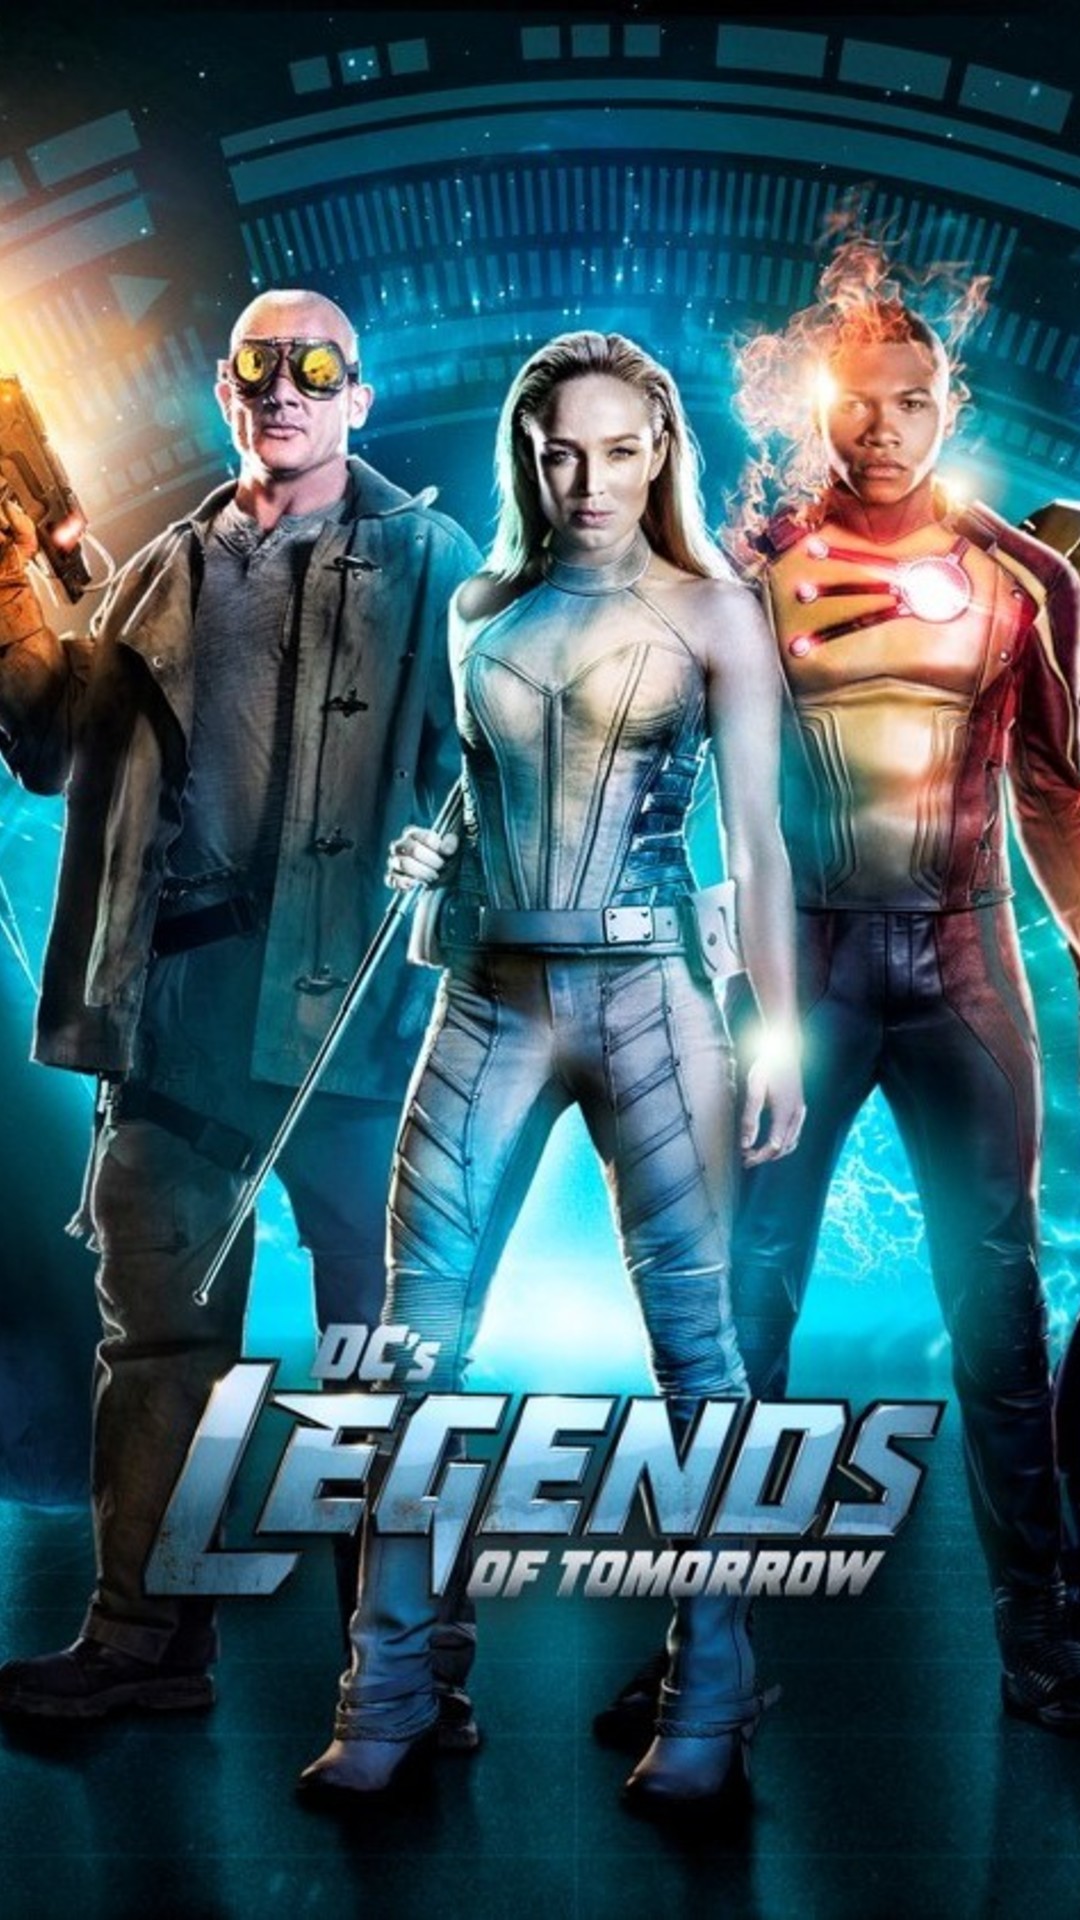 Dc'S Legends Of Tomorrow Wallpapers